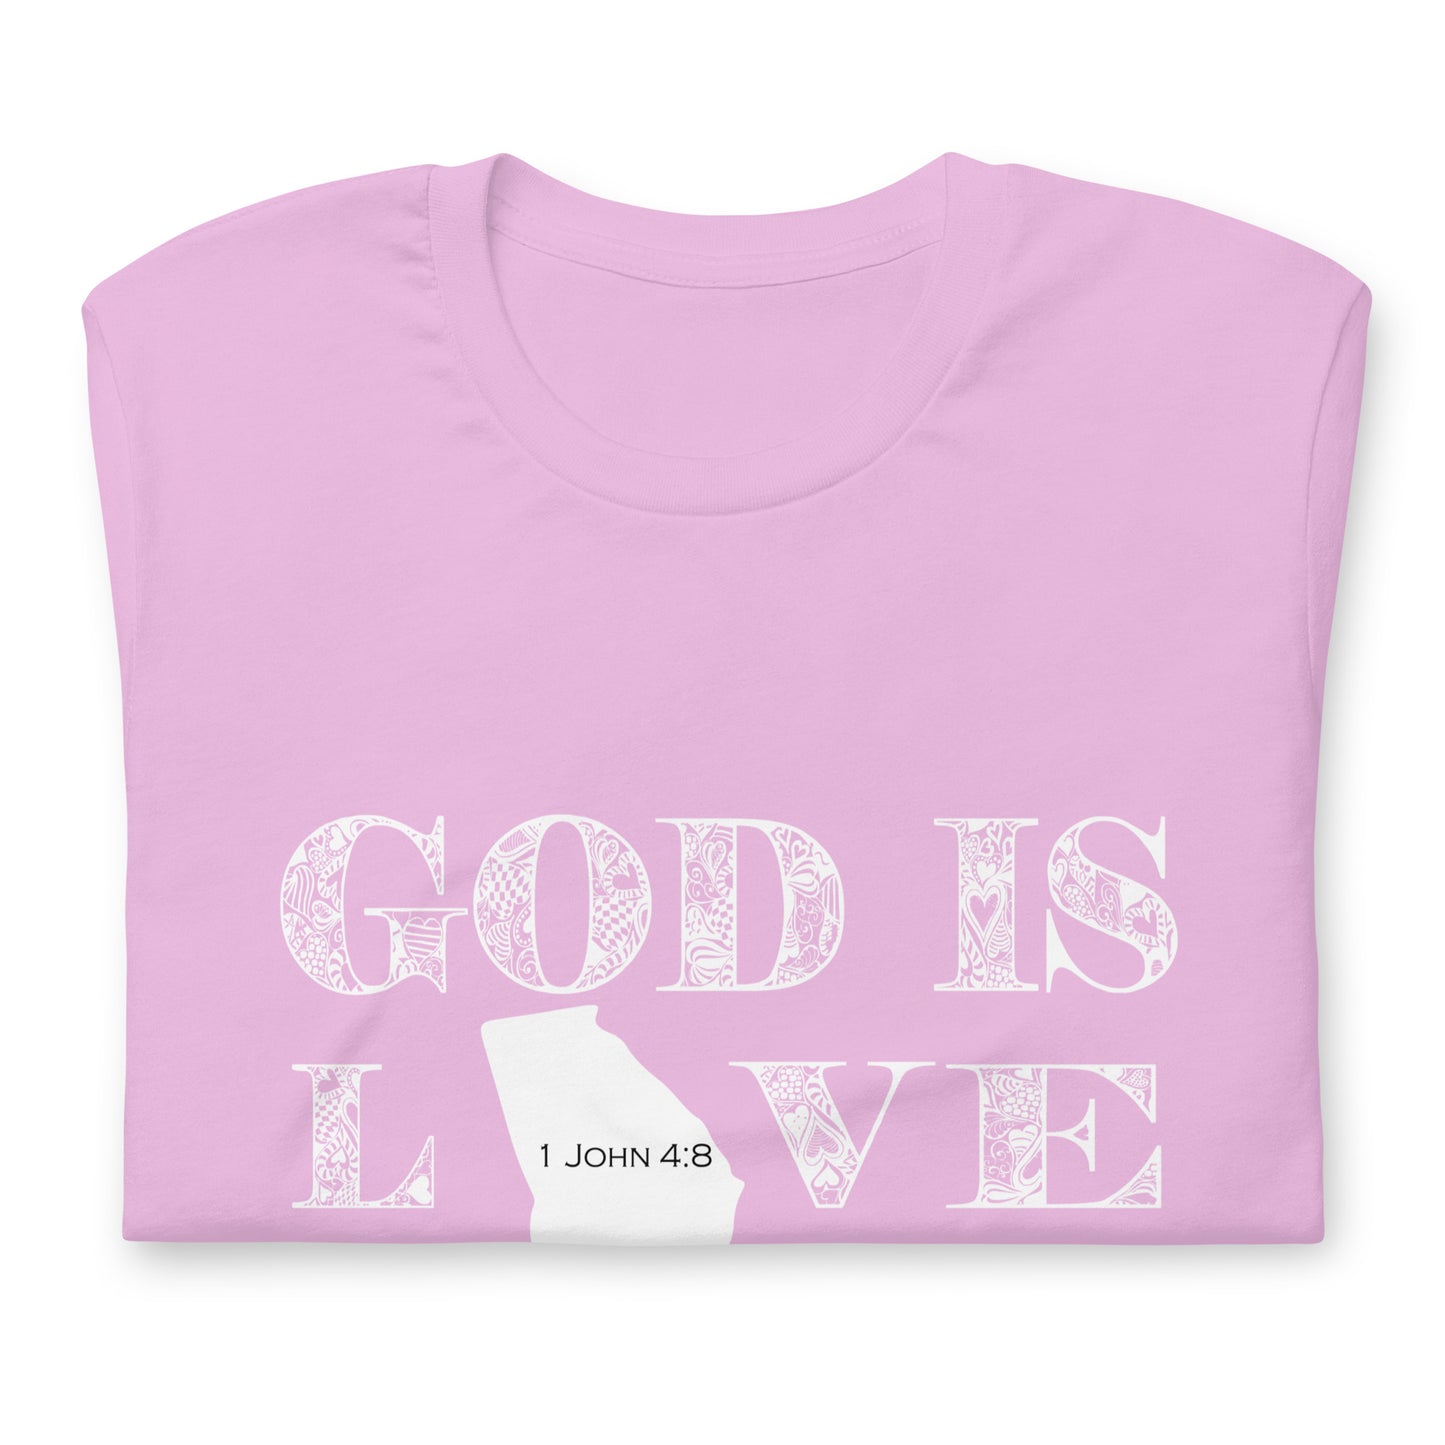 1 John 4:8 God is love Georgia T-shirt in Lilac - folded front view